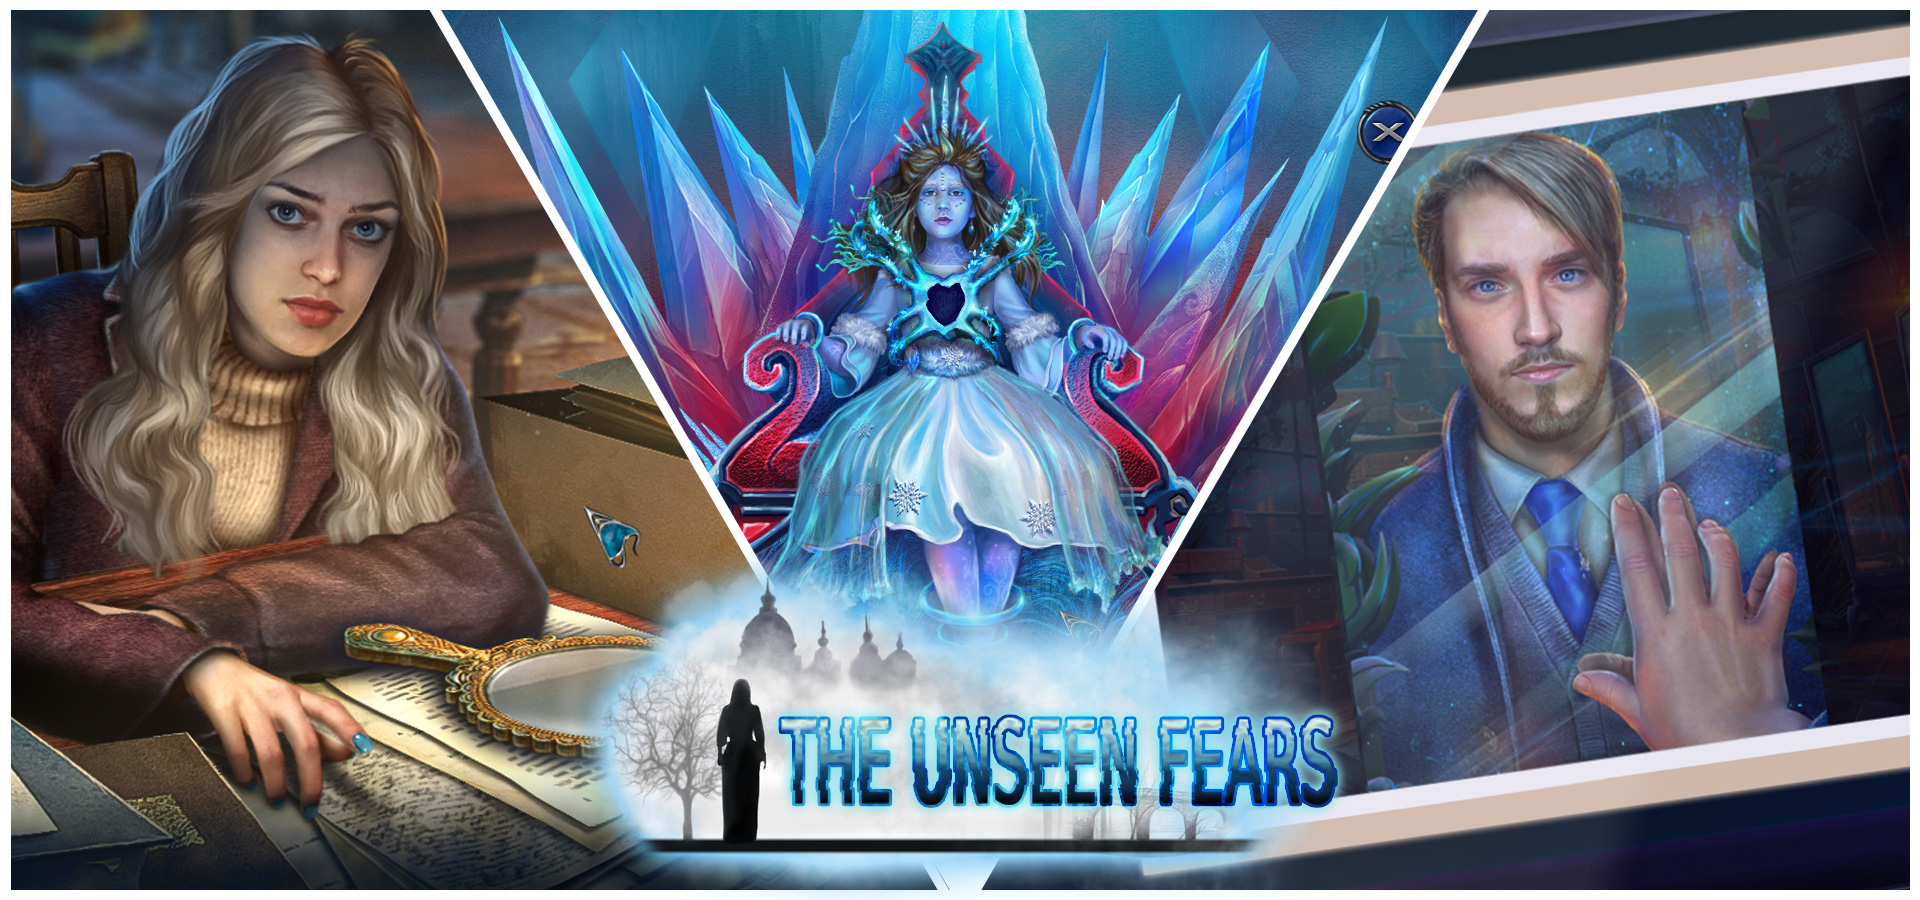 The Unseen Fears